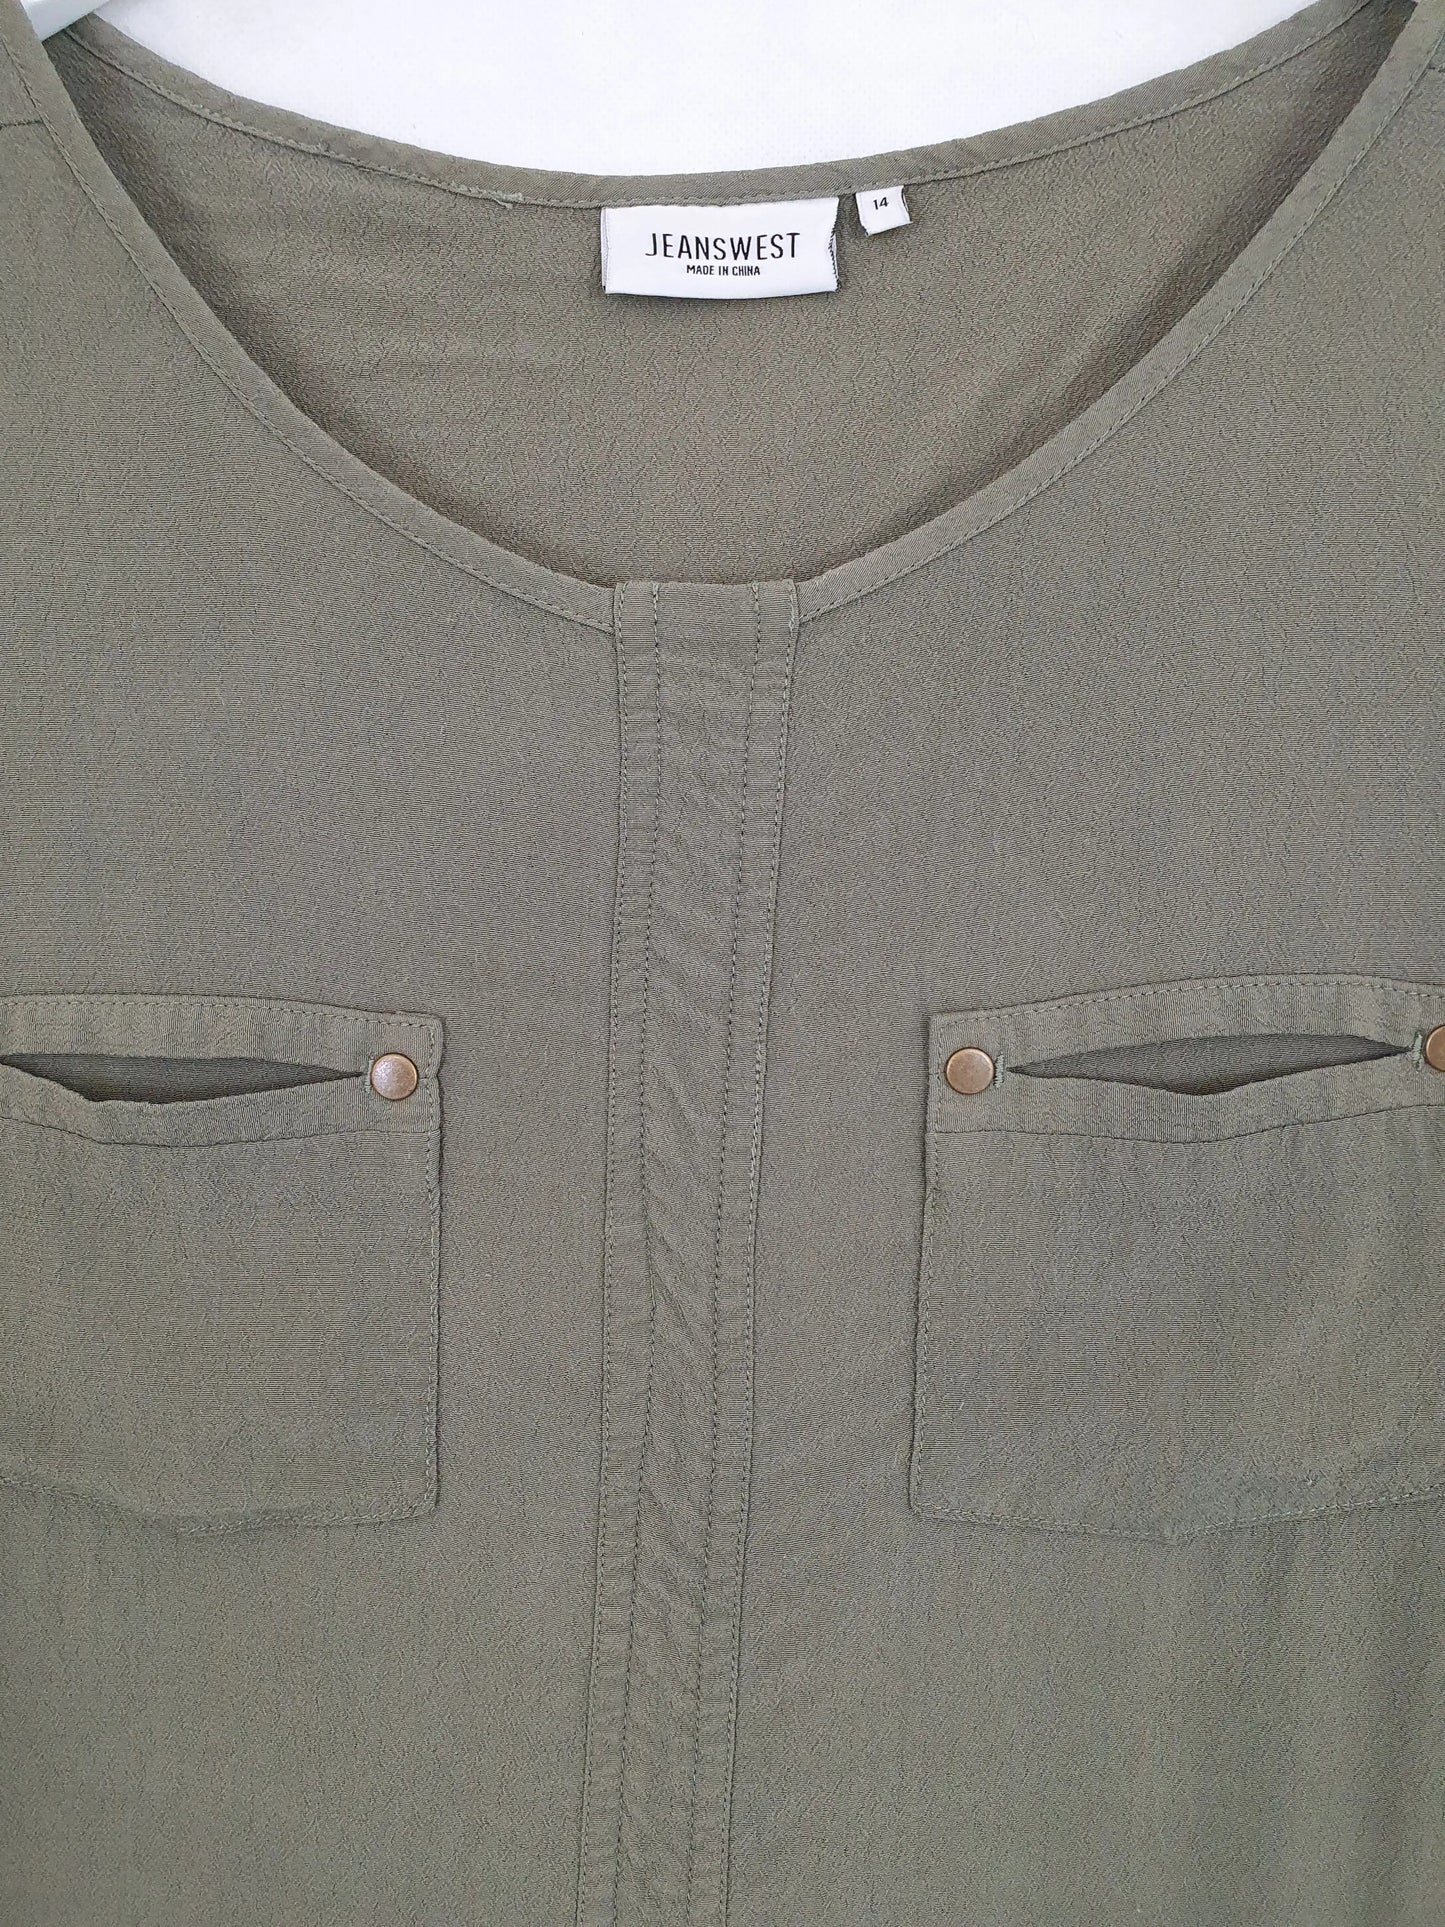 Jeanswest Khaki Pocket Top Size 14 by SwapUp-Online Second Hand Store-Online Thrift Store